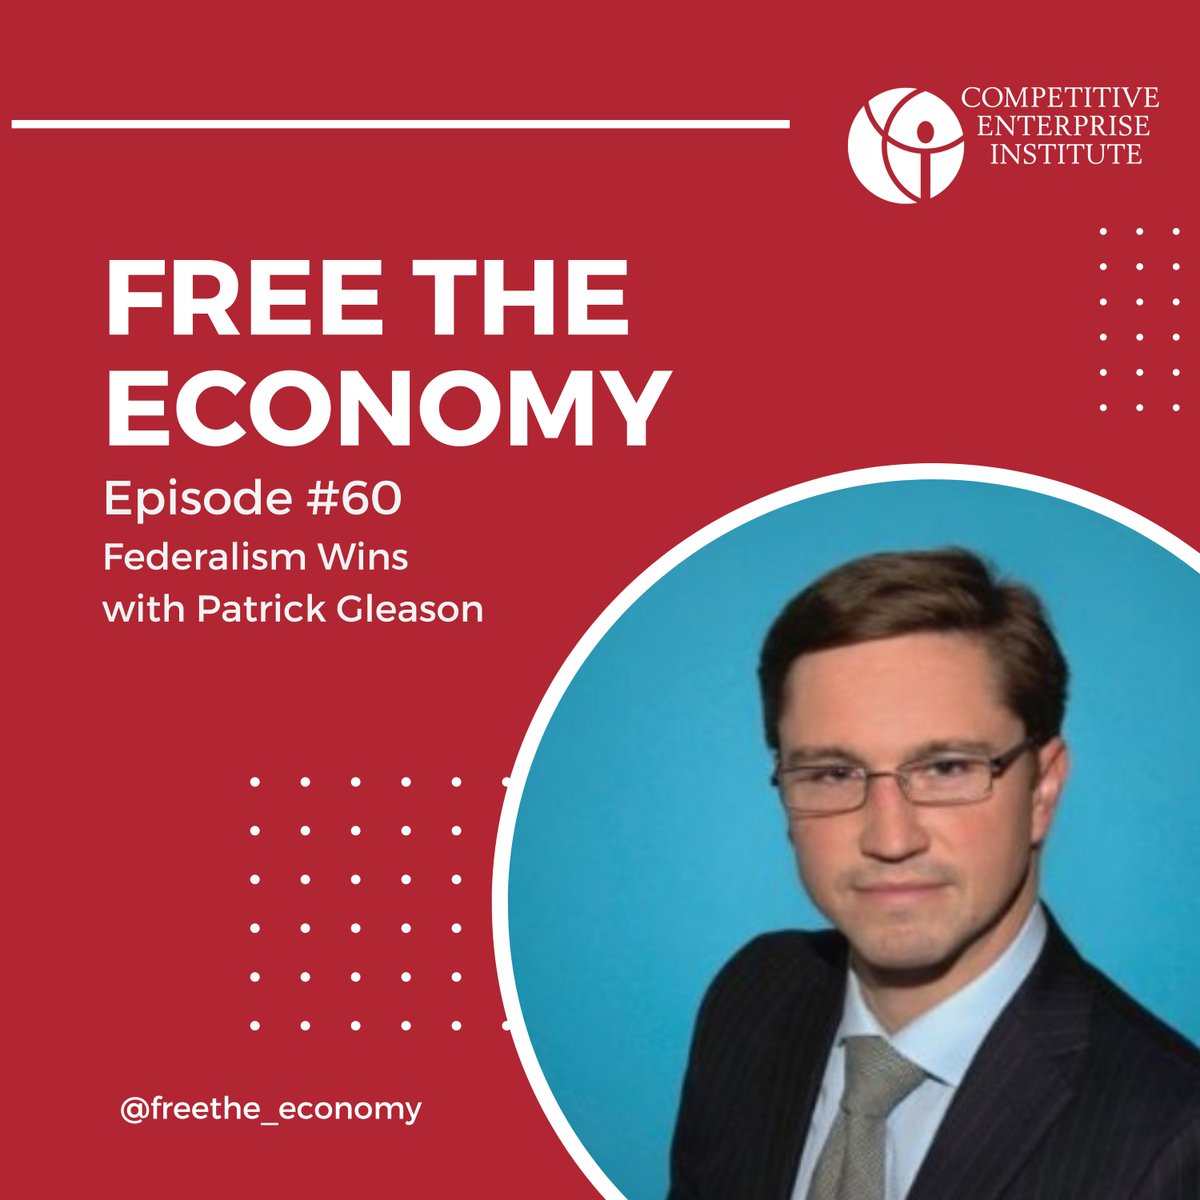 This week on @freethe_economy host @RichardMorrison welcomes special guest @patrickmgleason of @taxreformer. The two discuss We talk about reducing barriers to work, changes in state tax law, reforming business regulations, and more.

cei.org/?post_type=epi…